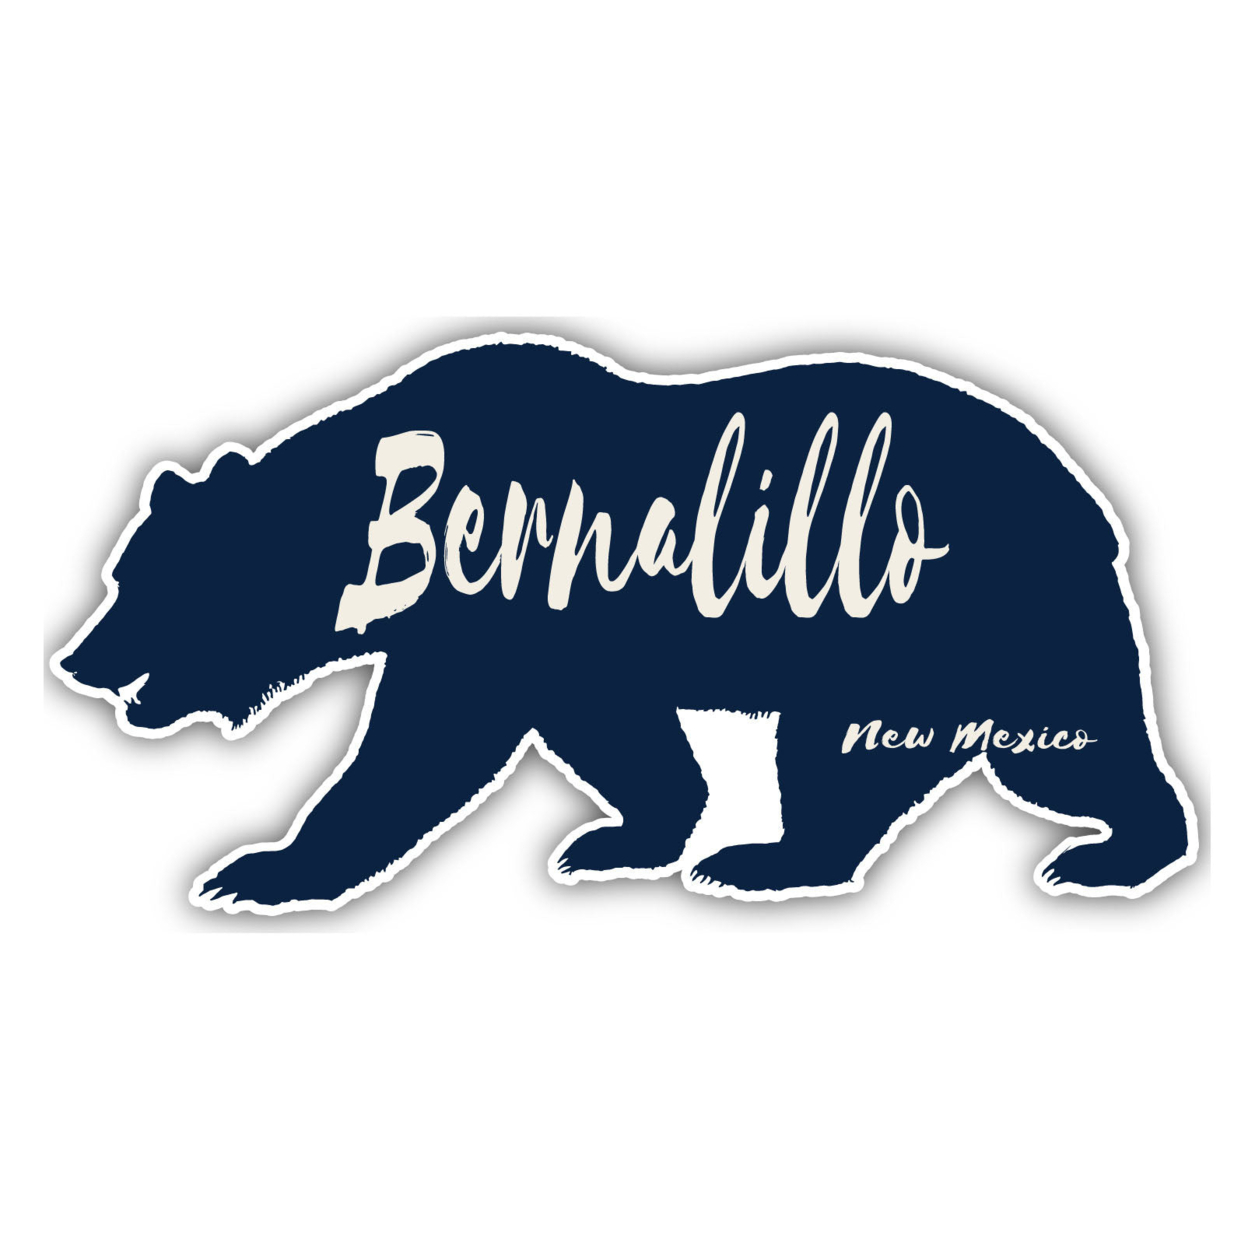 Bernalillo New Mexico Souvenir Decorative Stickers (Choose Theme And Size) - 4-Pack, 12-Inch, Bear